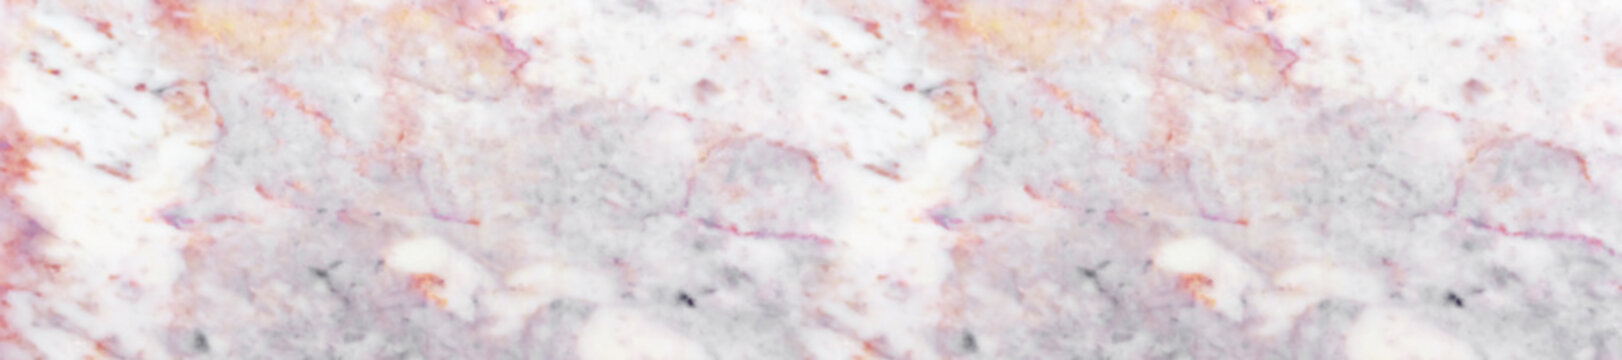  panorama blurry pink marble background